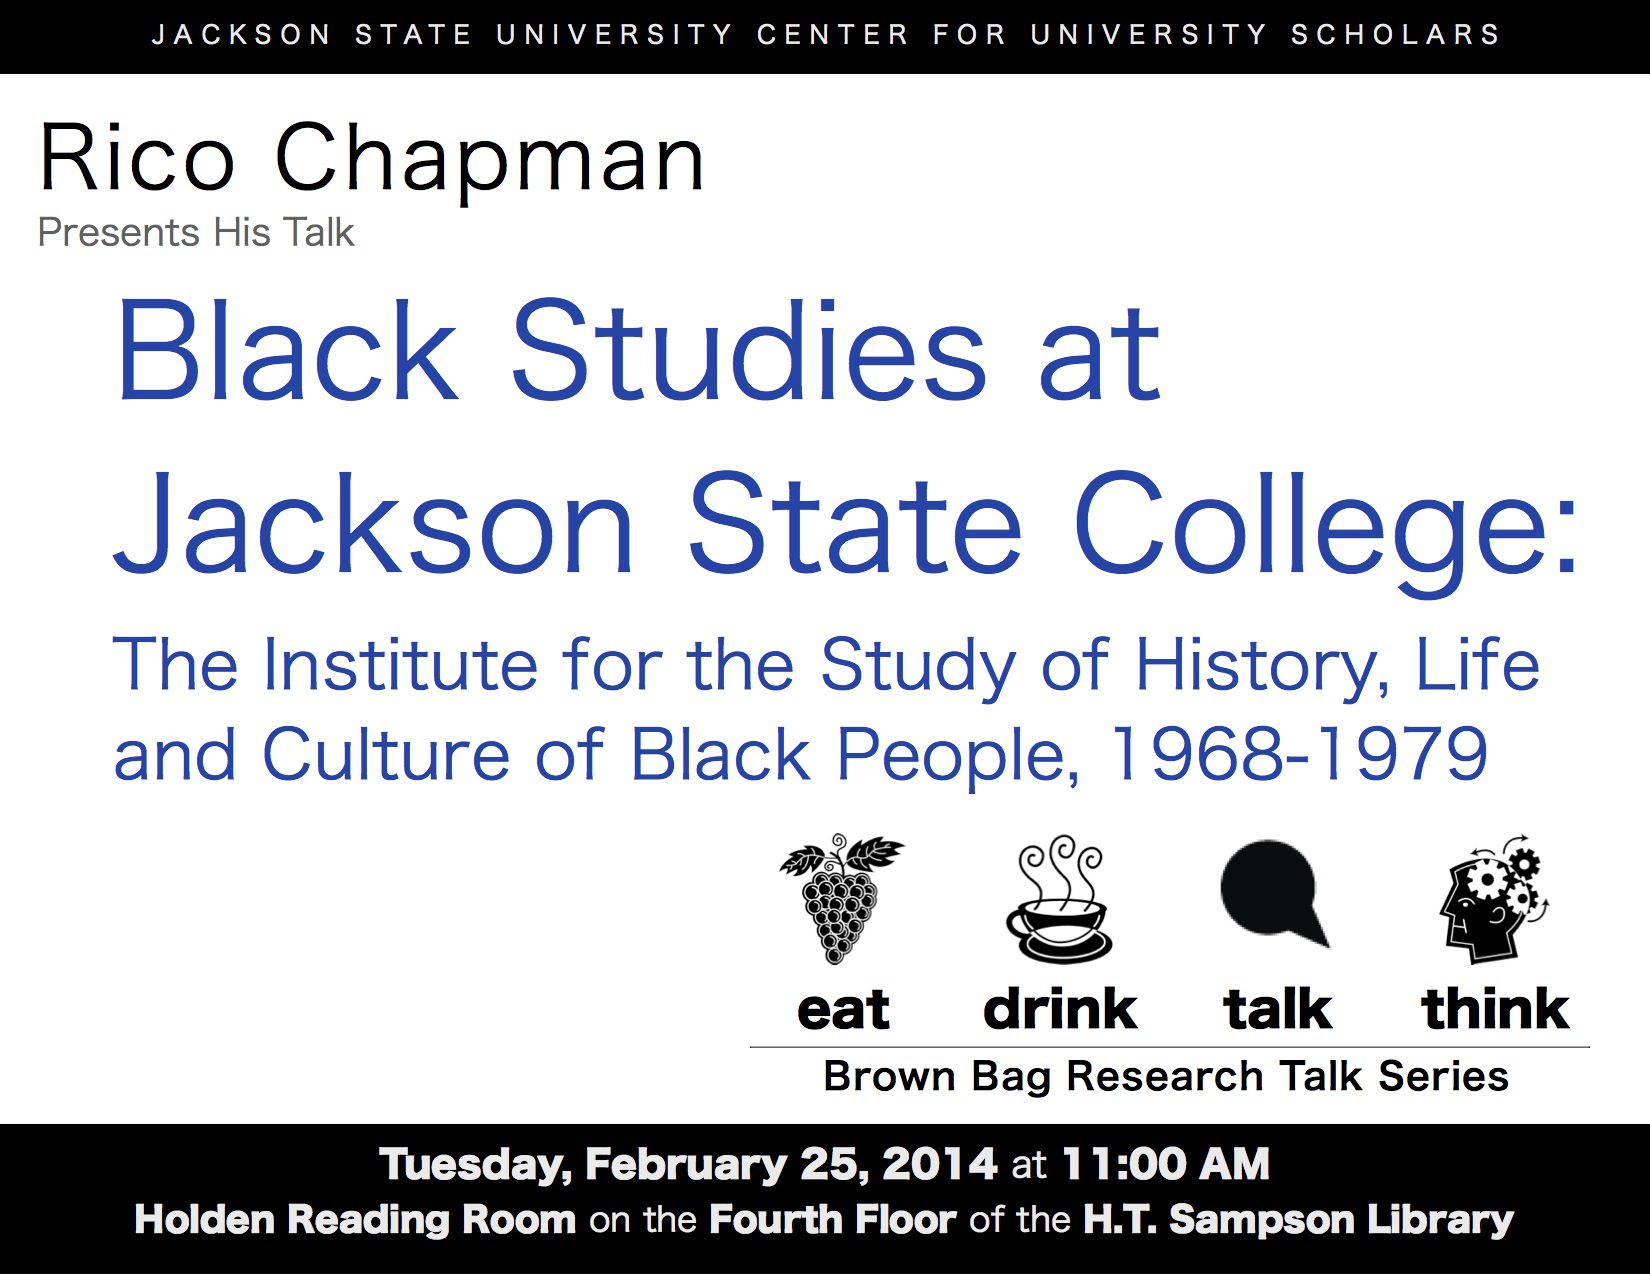 Flyer for Dr. Chapman's Brown Bag Research Talk